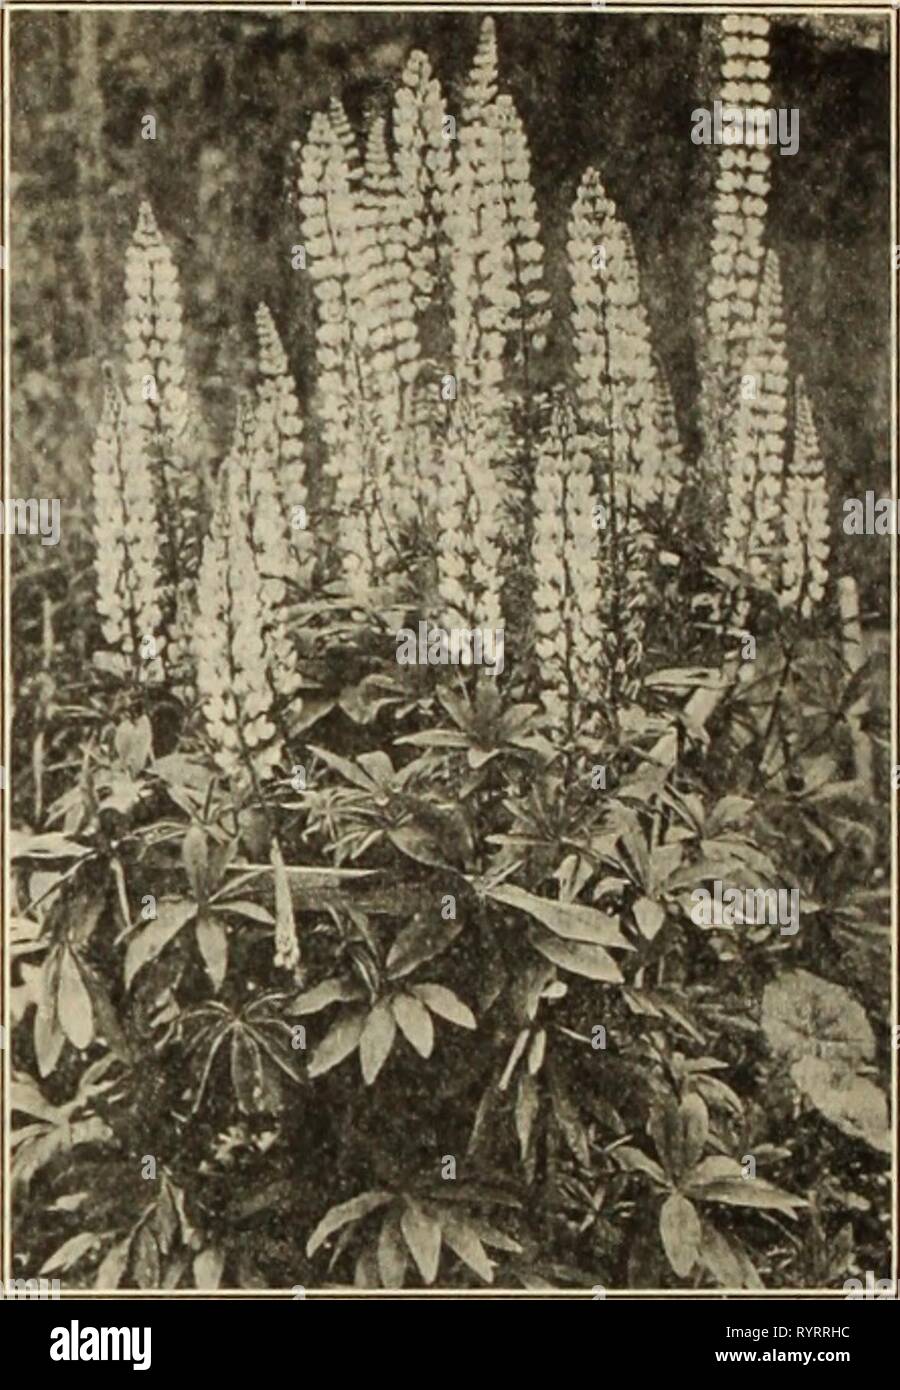 Dreer's wholesale price list of Dreer's wholesale price list of seeds plants and bulbs for florists : fertilizers, insecticides, tools and sundries . dreerswholesalep1912henr 2 Year: 1912  LUI'INUS PUI.YI'HYLLUS Lysimachia (Loose-strife). Perdoz. Perioo Cillata. 4-inch pots $0 85 Clethroldes. 4-inch pots Fortunei Nummularla. 3-inch pots . .... Punctata. 4-inch pots Lythrum (Rose Loose-strife). Koseum Superbum. Strong Vlrgatum Perry's Variety iNewi Mertensia (Blue Bells). Vlrglnlca. 3-inch pots . 0 85 $6 00 85 6 00 85 6 00 75 5 00 85 6 00 85 6 00 1 50 10 00 2 50 Monarda (Horse Mint). Dldyma. 4- Stock Photo